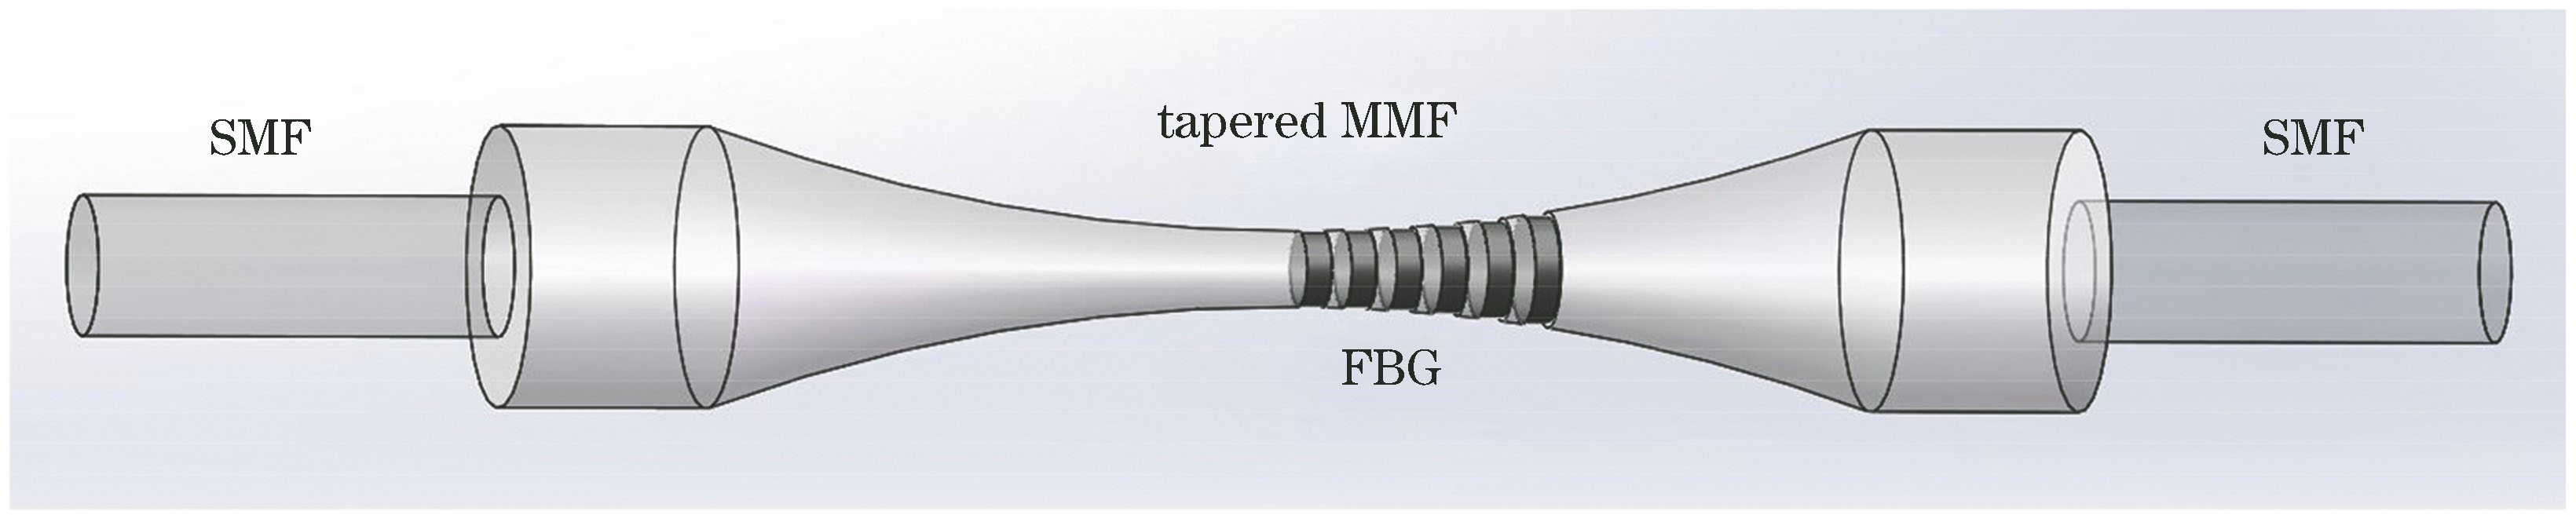 Structural schematic of STMS-FBG